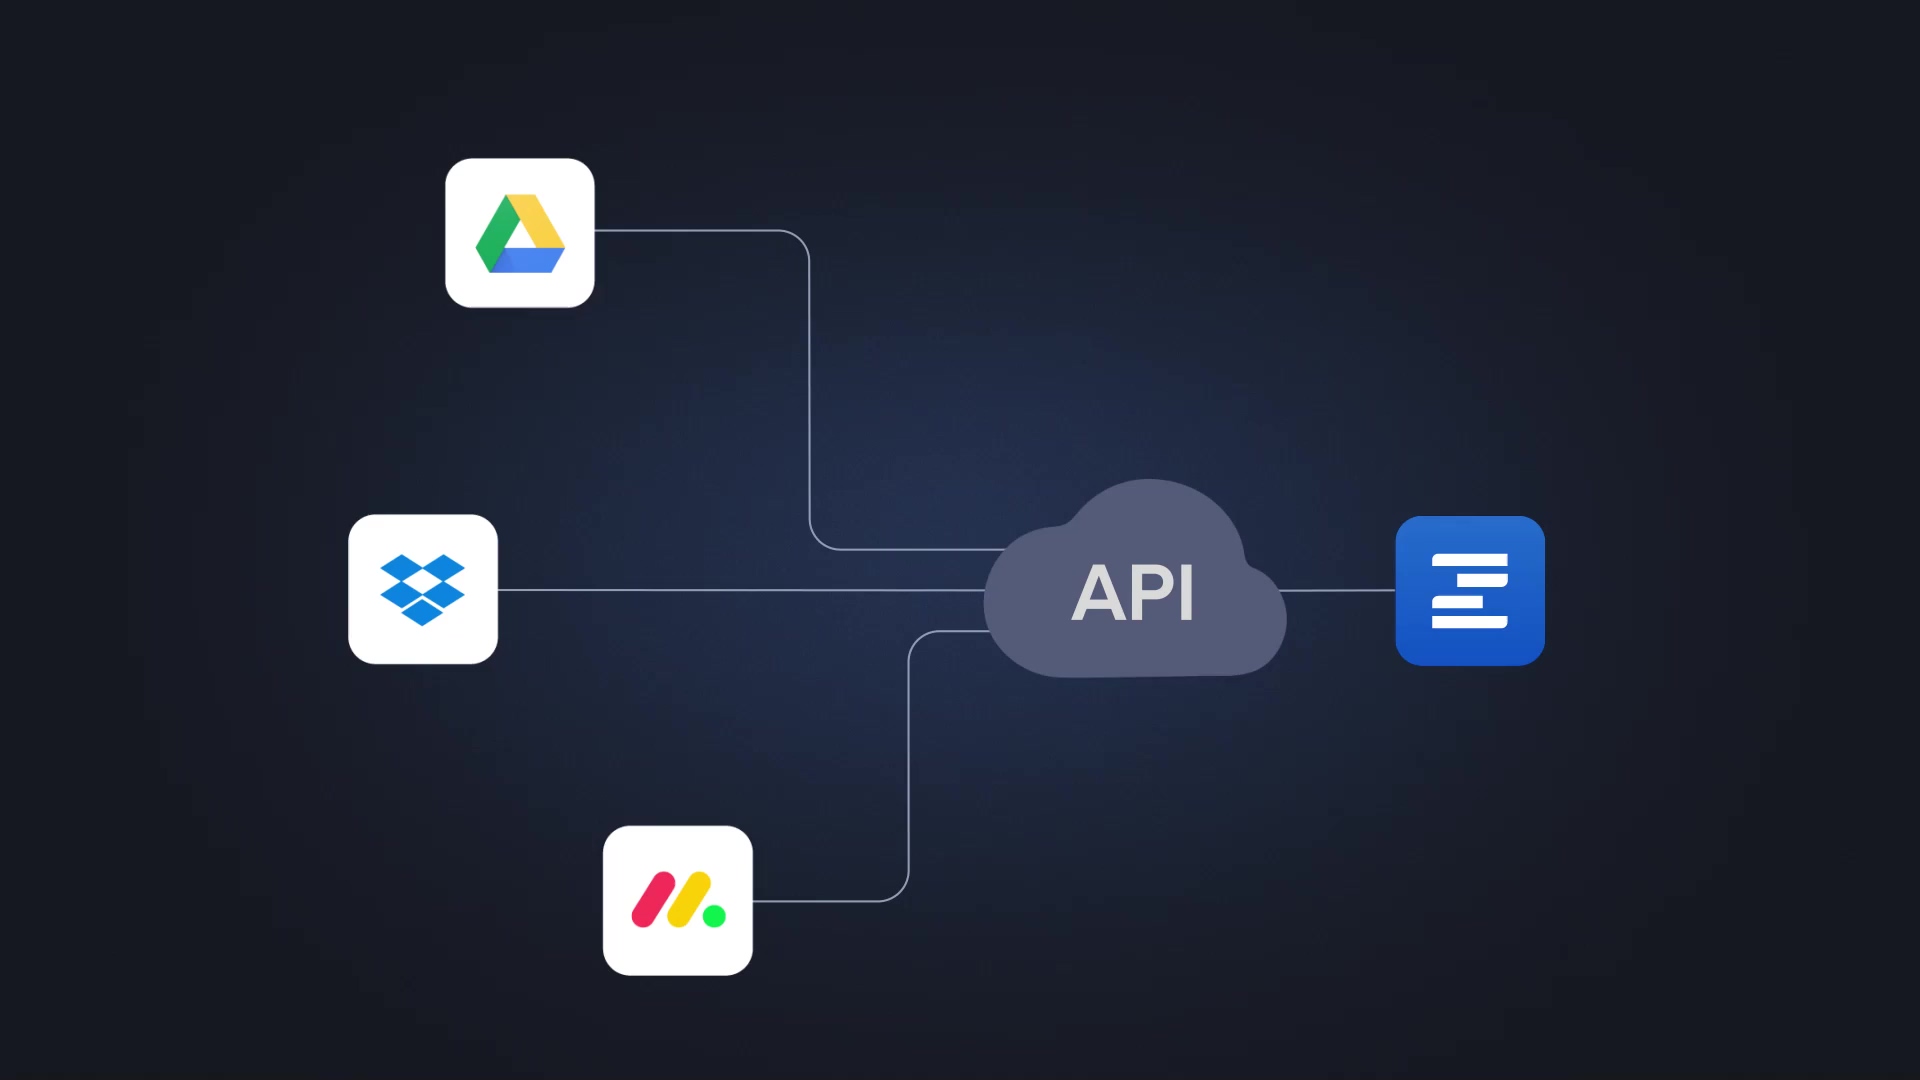 Powerful API - Developers Page thumbnail - Google Drive, Dropbox, Monday.com icons connected within API cloud